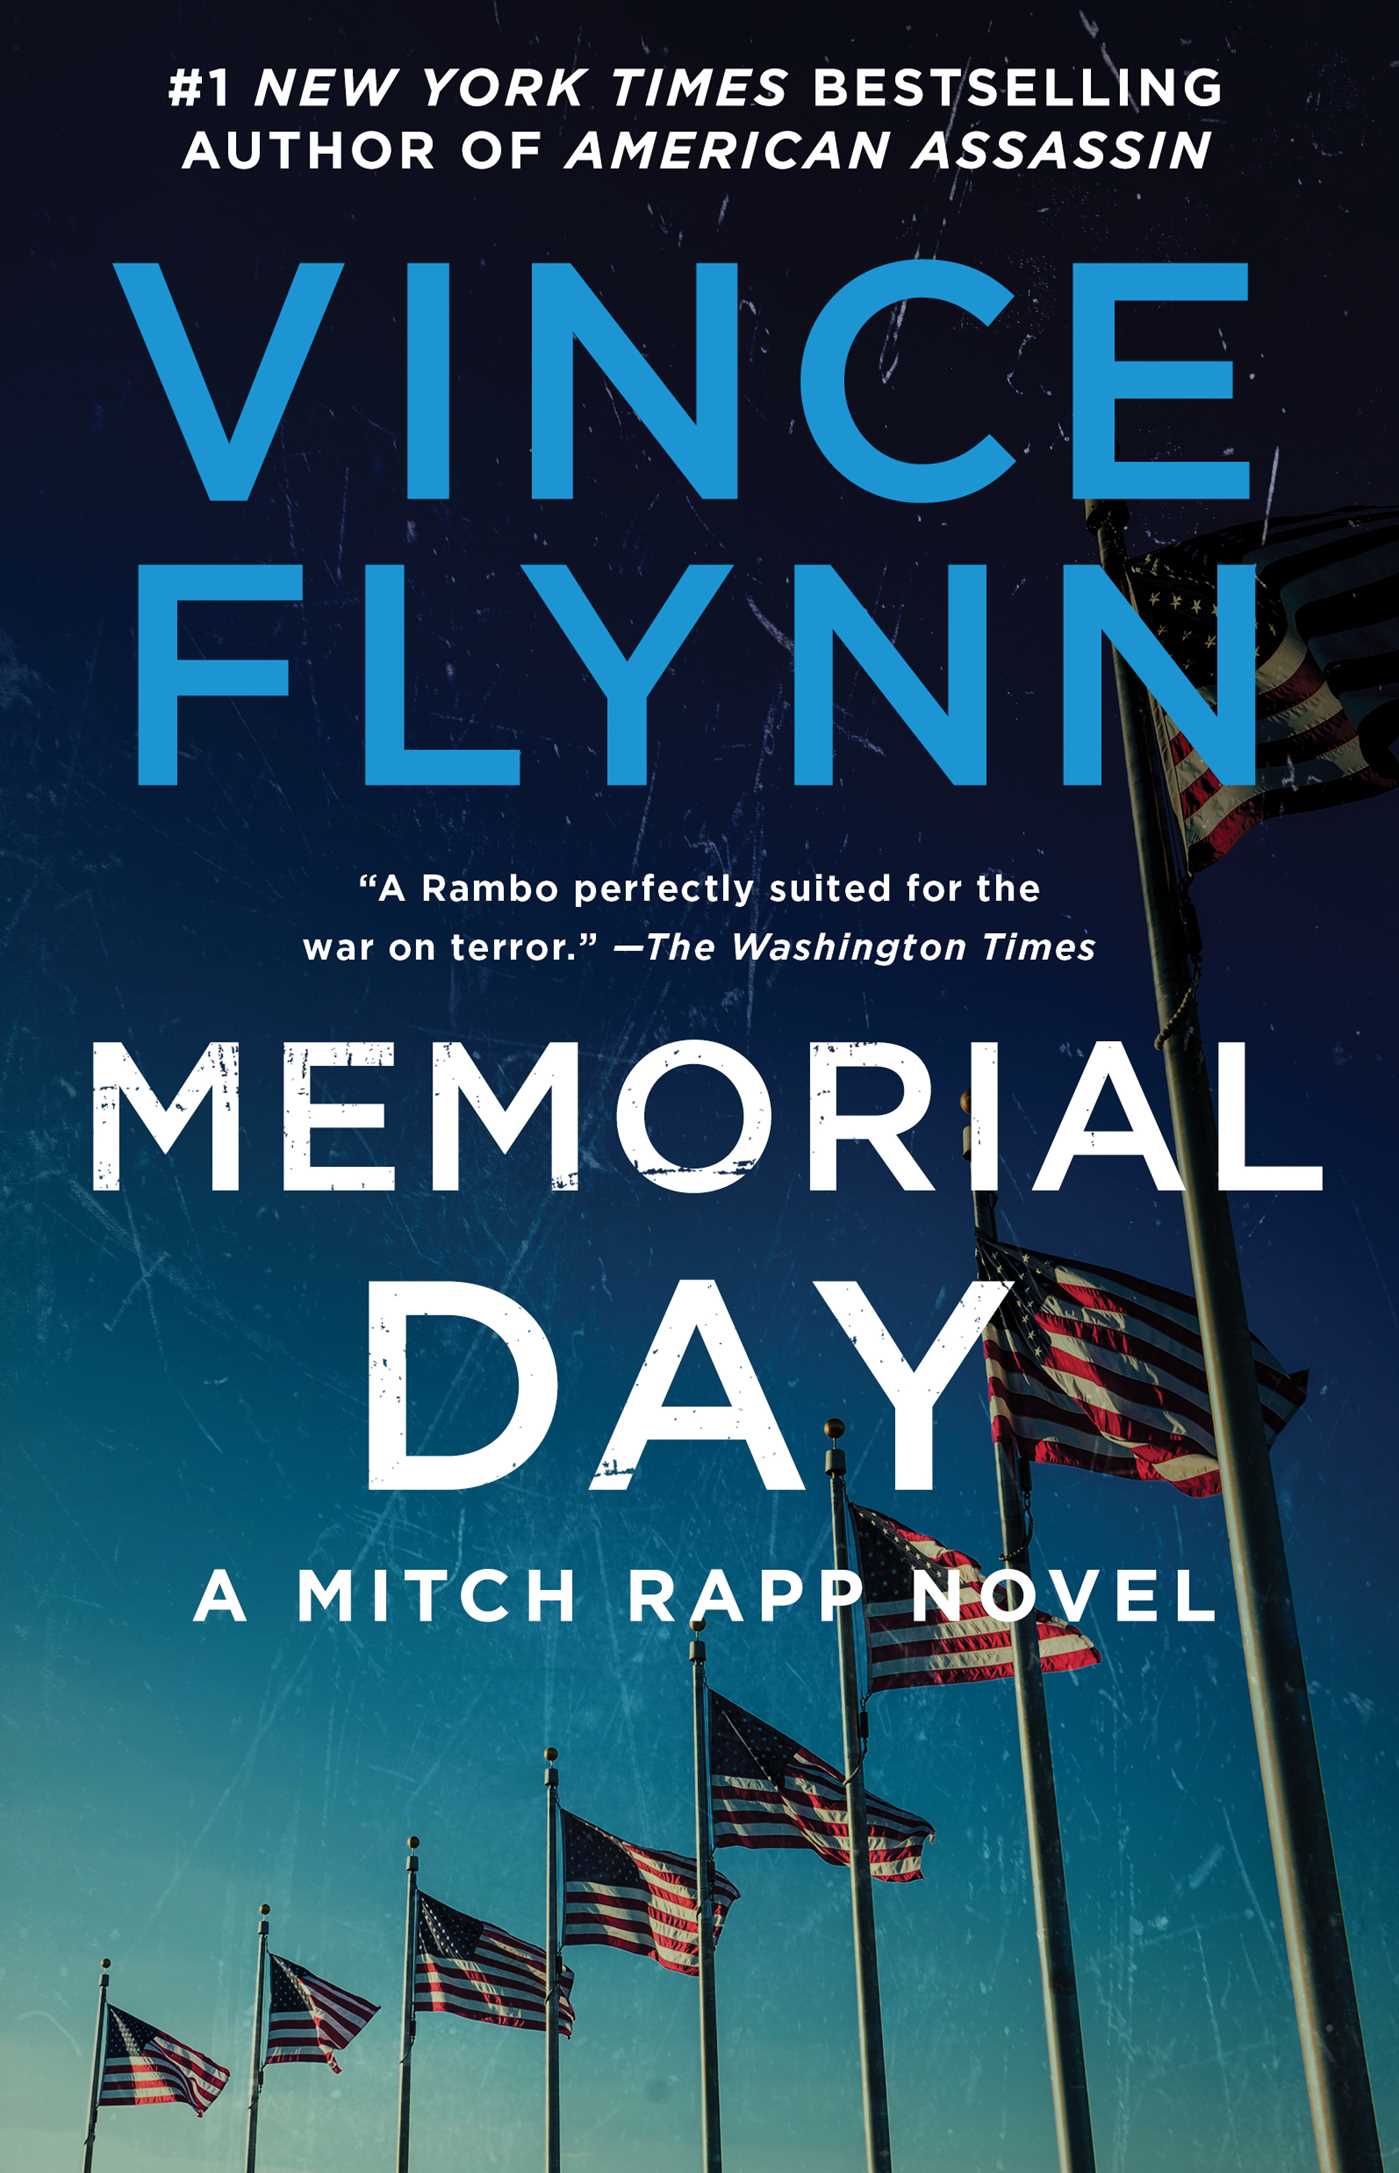 A Mitch Rapp Novel: Memorial Day (Series #7) (Paperback) - image 1 of 1